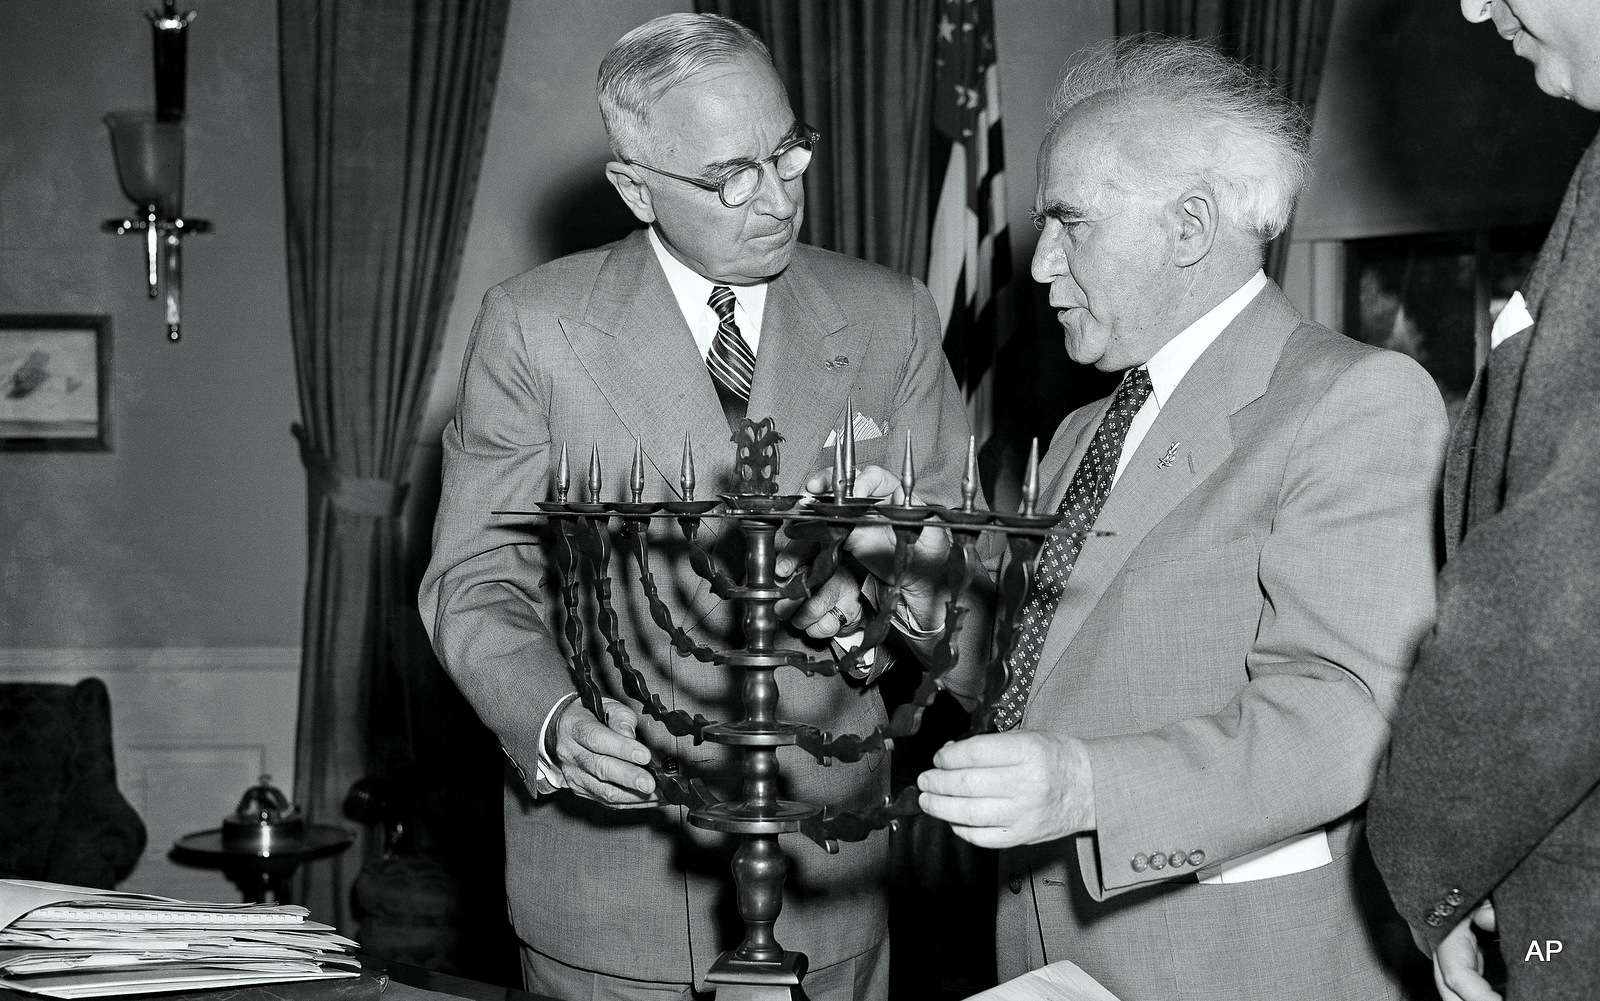 President Harry Truman receives an ornate bronze menorah as a birthday gift from David Ben-Gurion, prime minister of Israel, who called on the chief executive to discuss peace and economic development in the Middle East, May 8, 1951. Ben-Gurion said the menorah was made in 1767. This is the president's 67th birthday. (AP Photo/Henry Griffin)